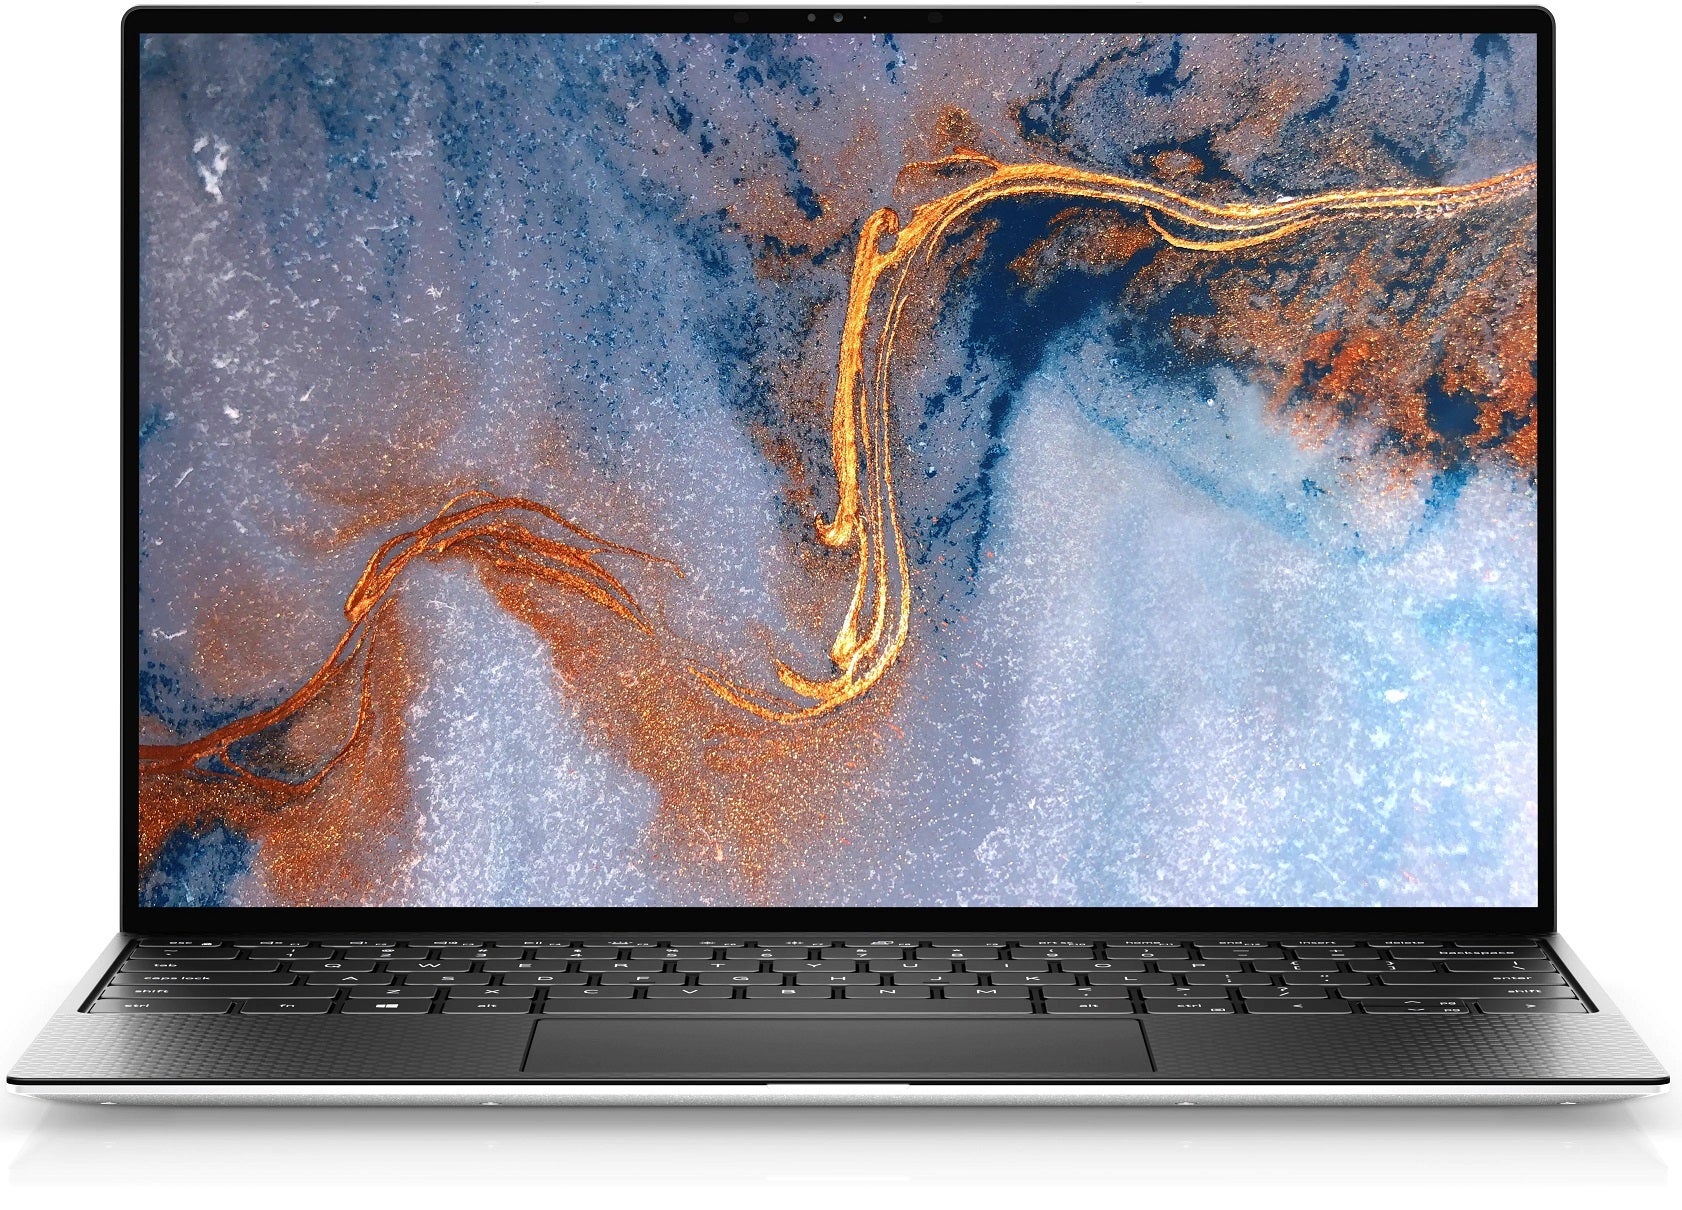 Laptops like the Dell XPS 13 don&#039;t need a notch to fit a webcam and other sensors in a thin top bezel - Apple, I never got used to the iPhone notch, now it&#039;s on MacBooks too?